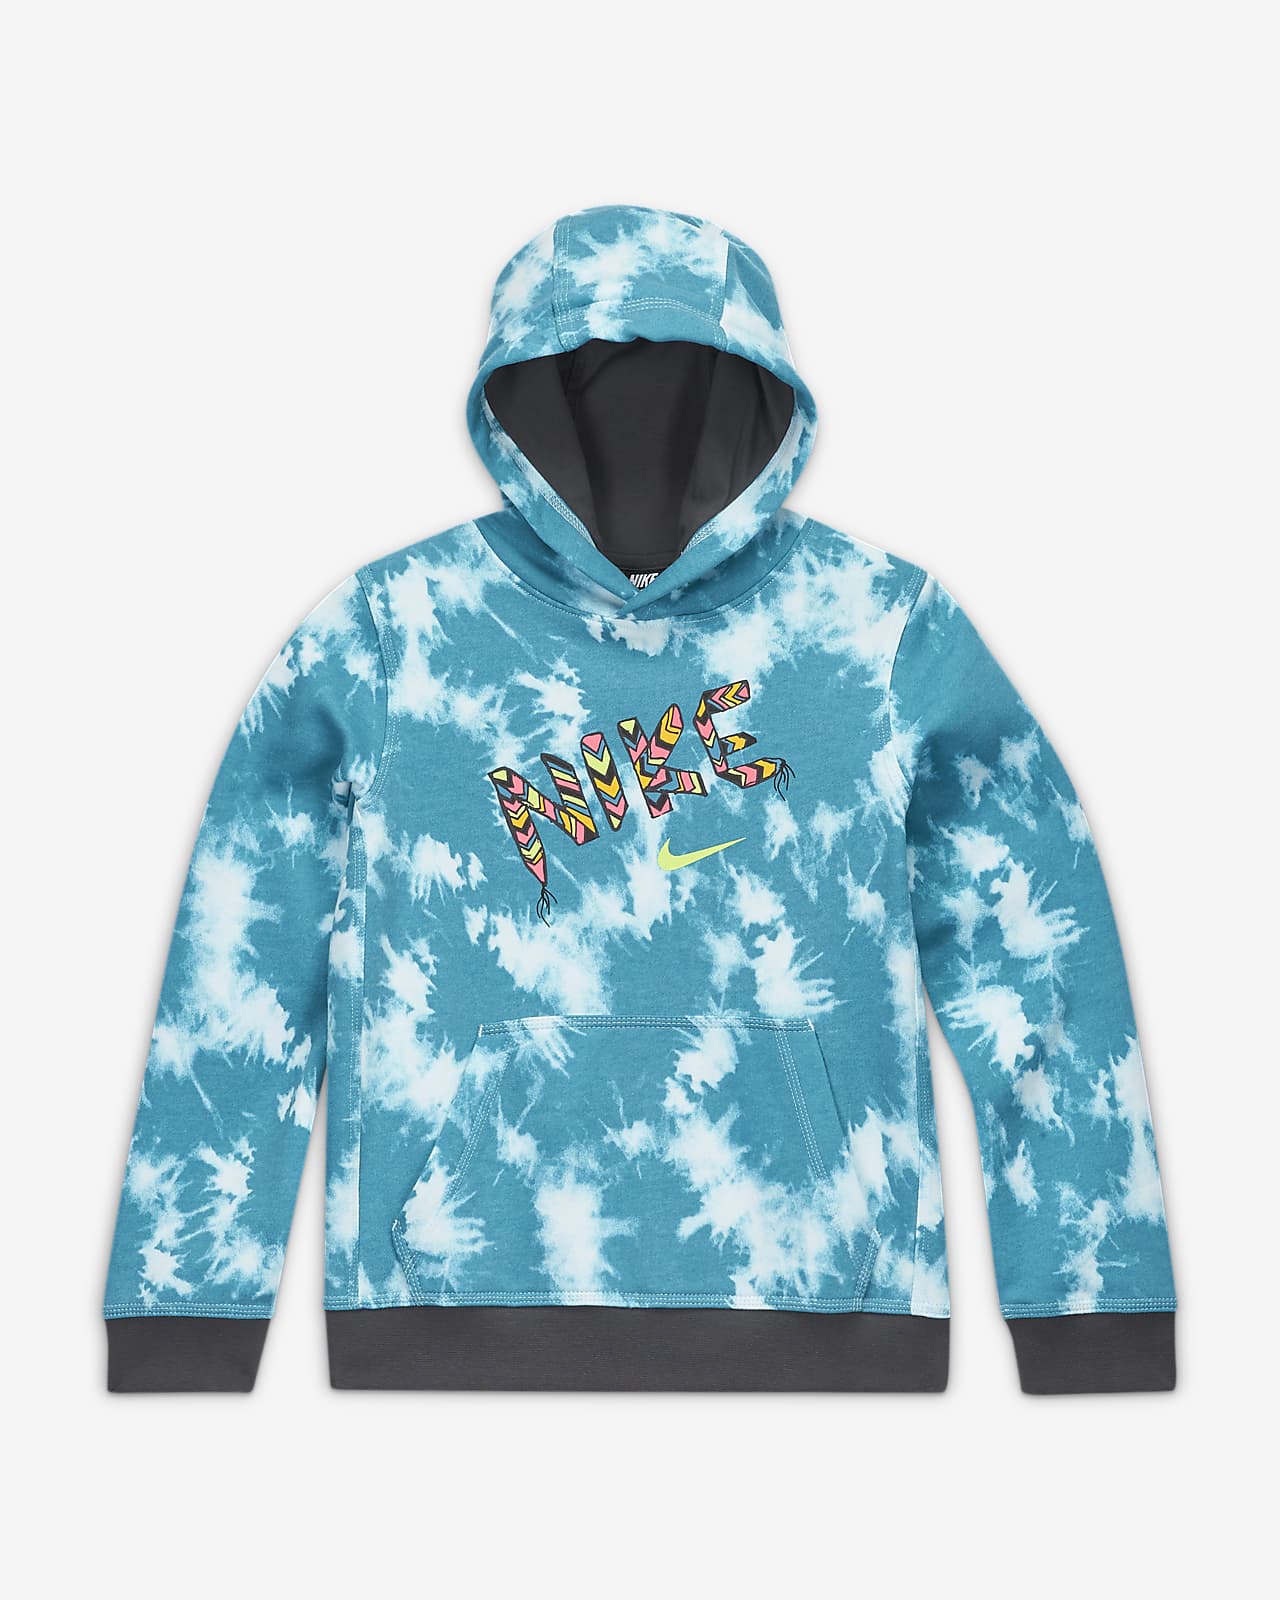 nike youth pullover hoodie